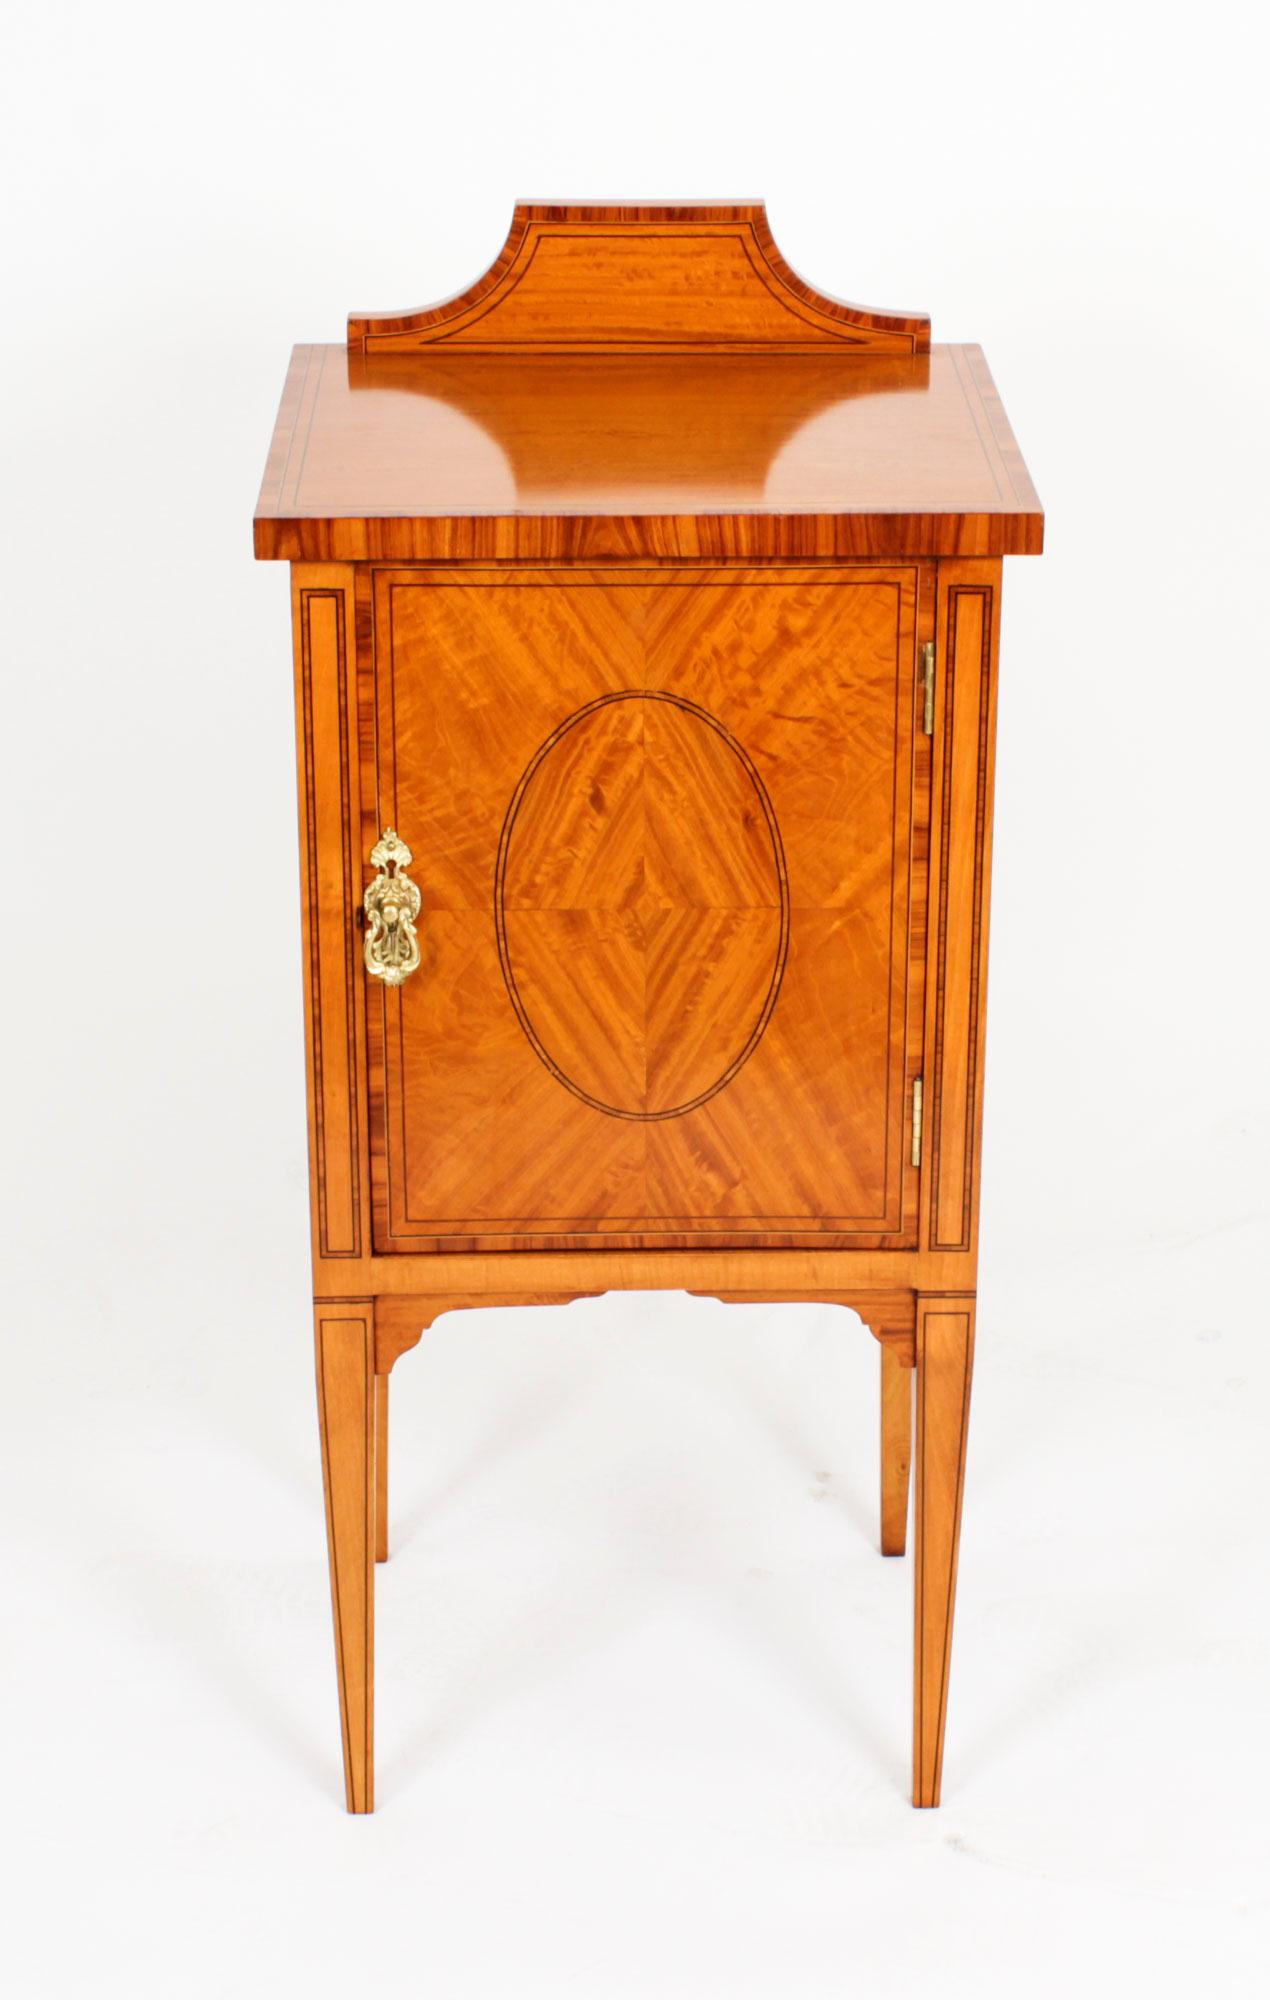 This is a splendid antique Victorian satinwood bedside cabinet, circa 1880 in date.

The cabinet features beautiful satinwood with decorative ebonised line inlay.  It has a frieze drawer above a cupboard with a central shelf and is raised on elegant